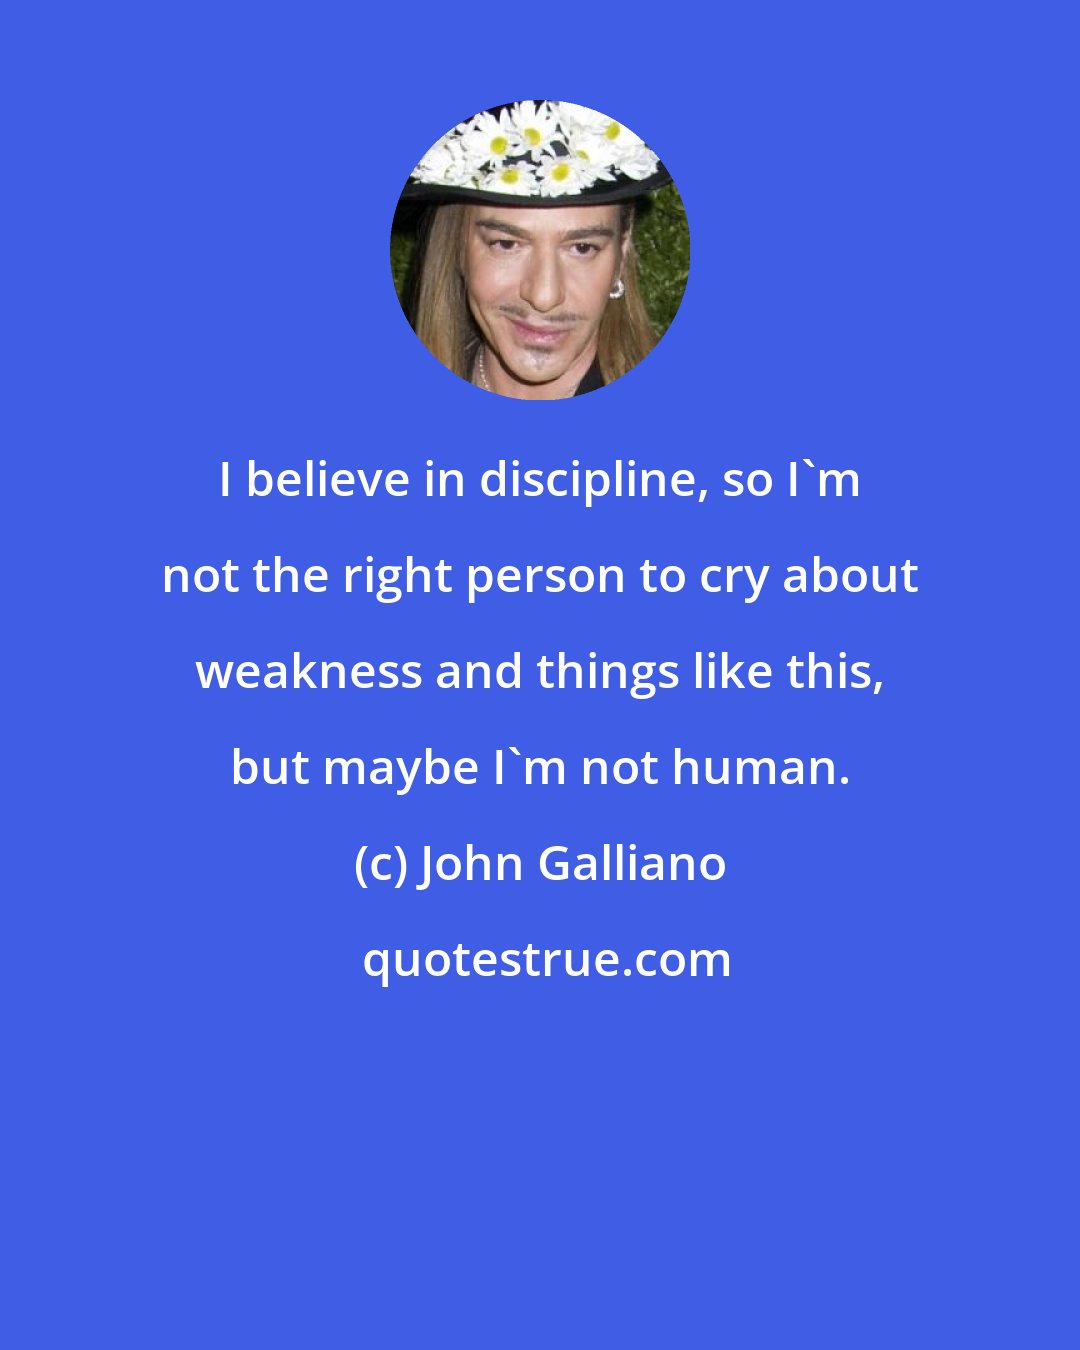 John Galliano: I believe in discipline, so I'm not the right person to cry about weakness and things like this, but maybe I'm not human.